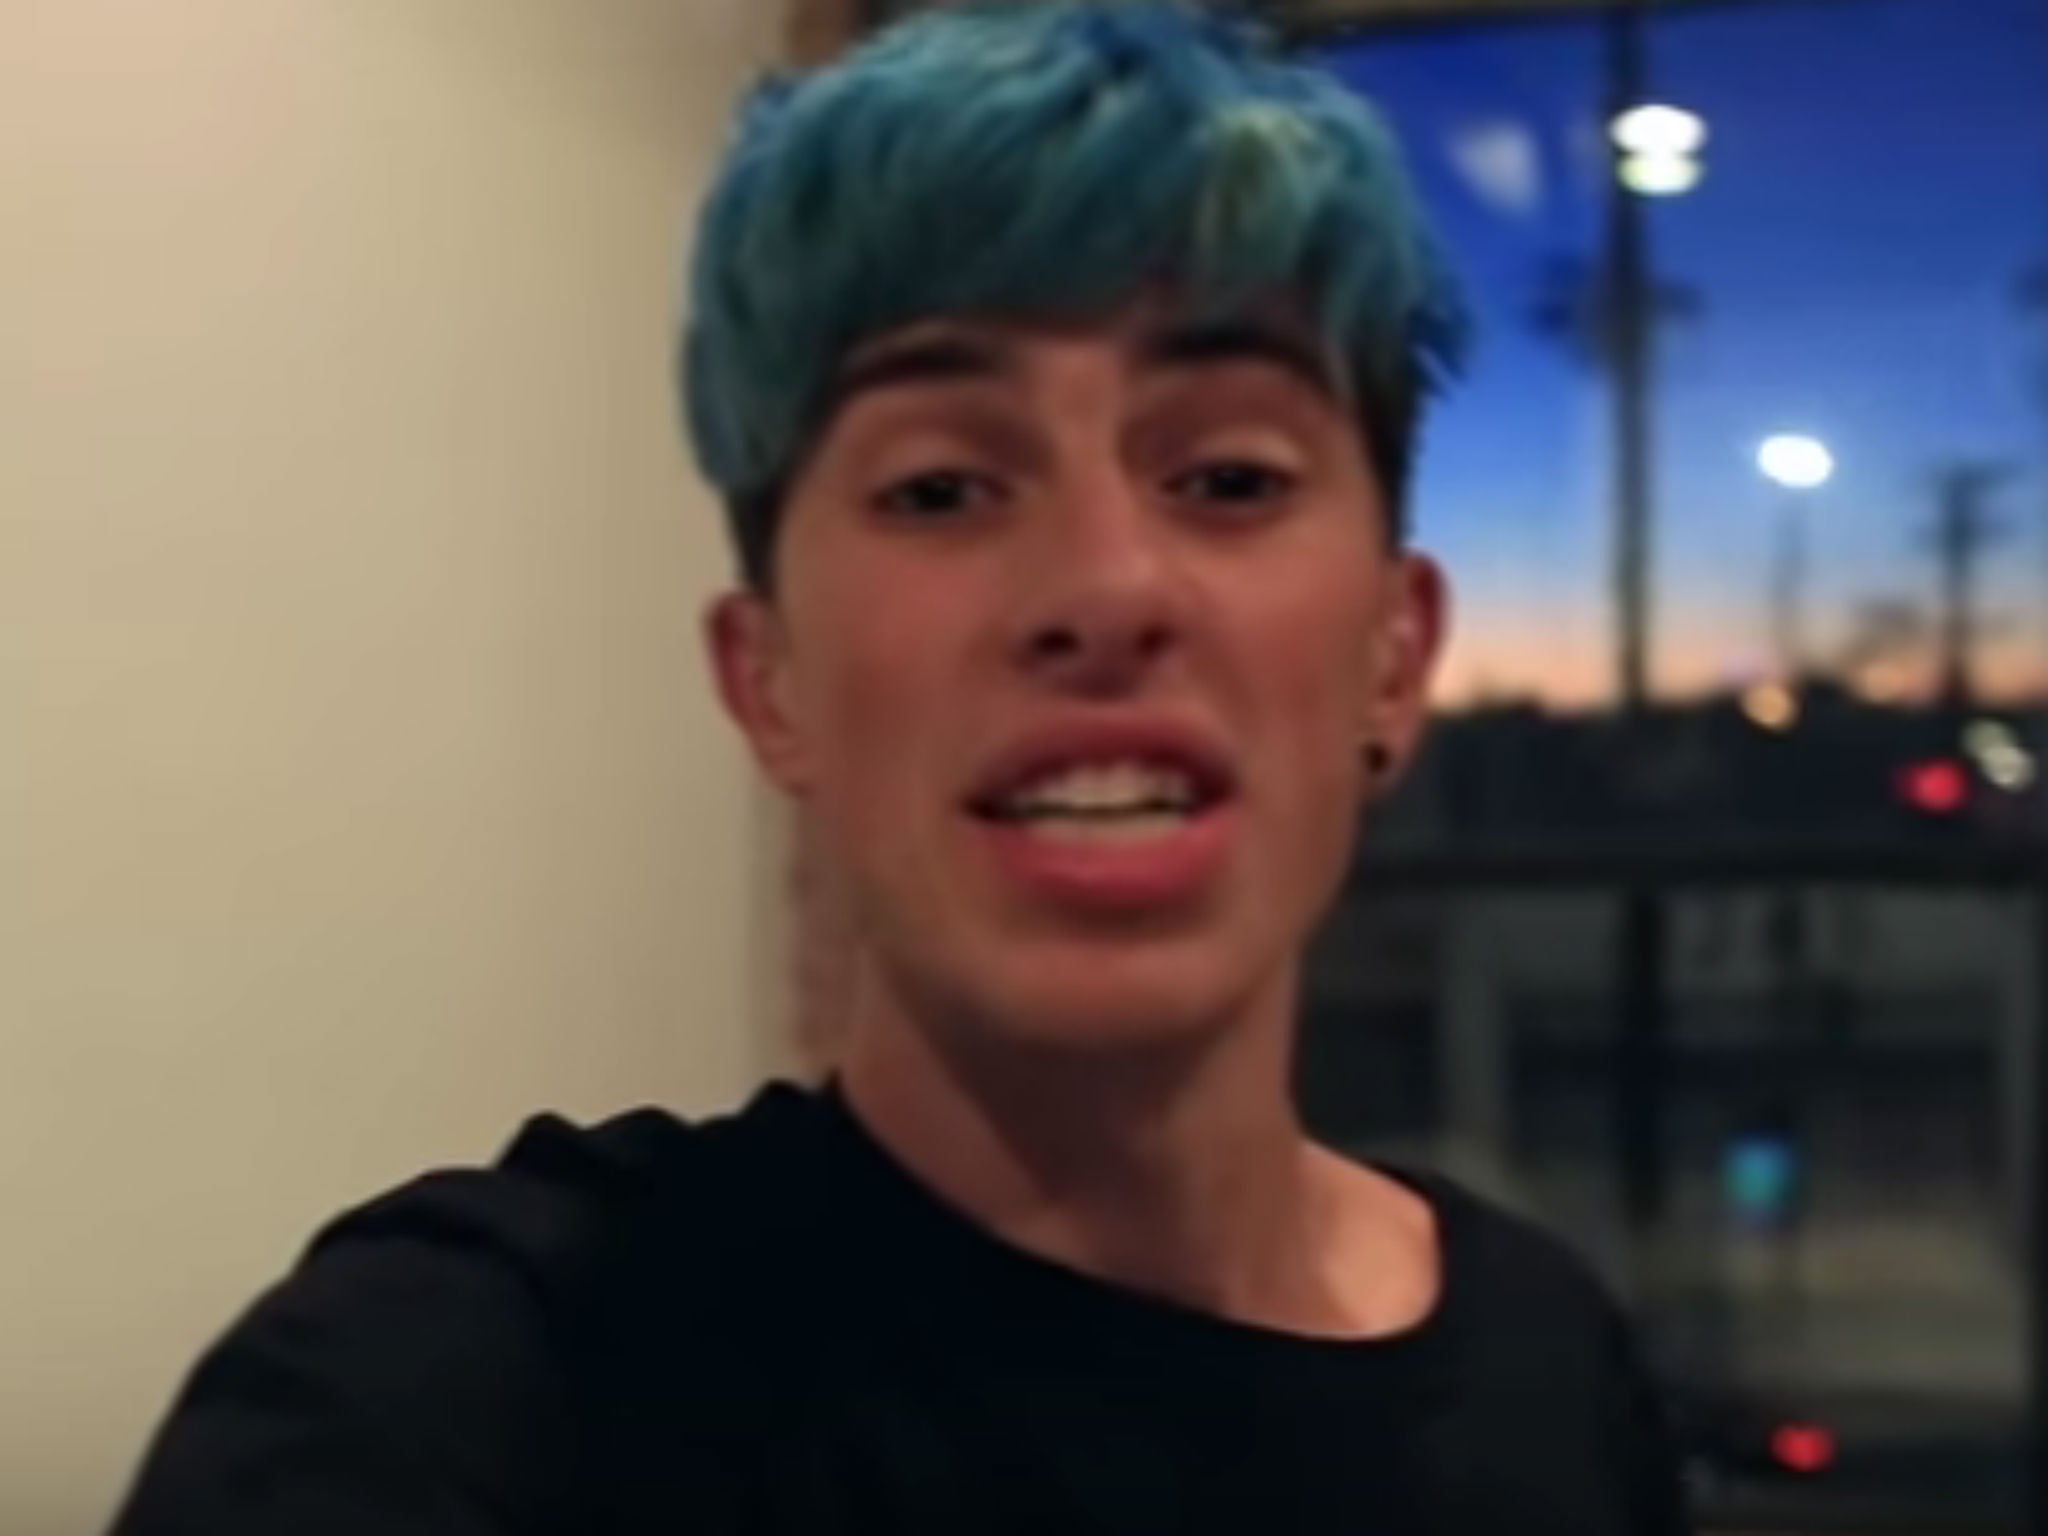 Sam Pepper Heavily Criticised For Vile Fake Murder Prank Video The Independent